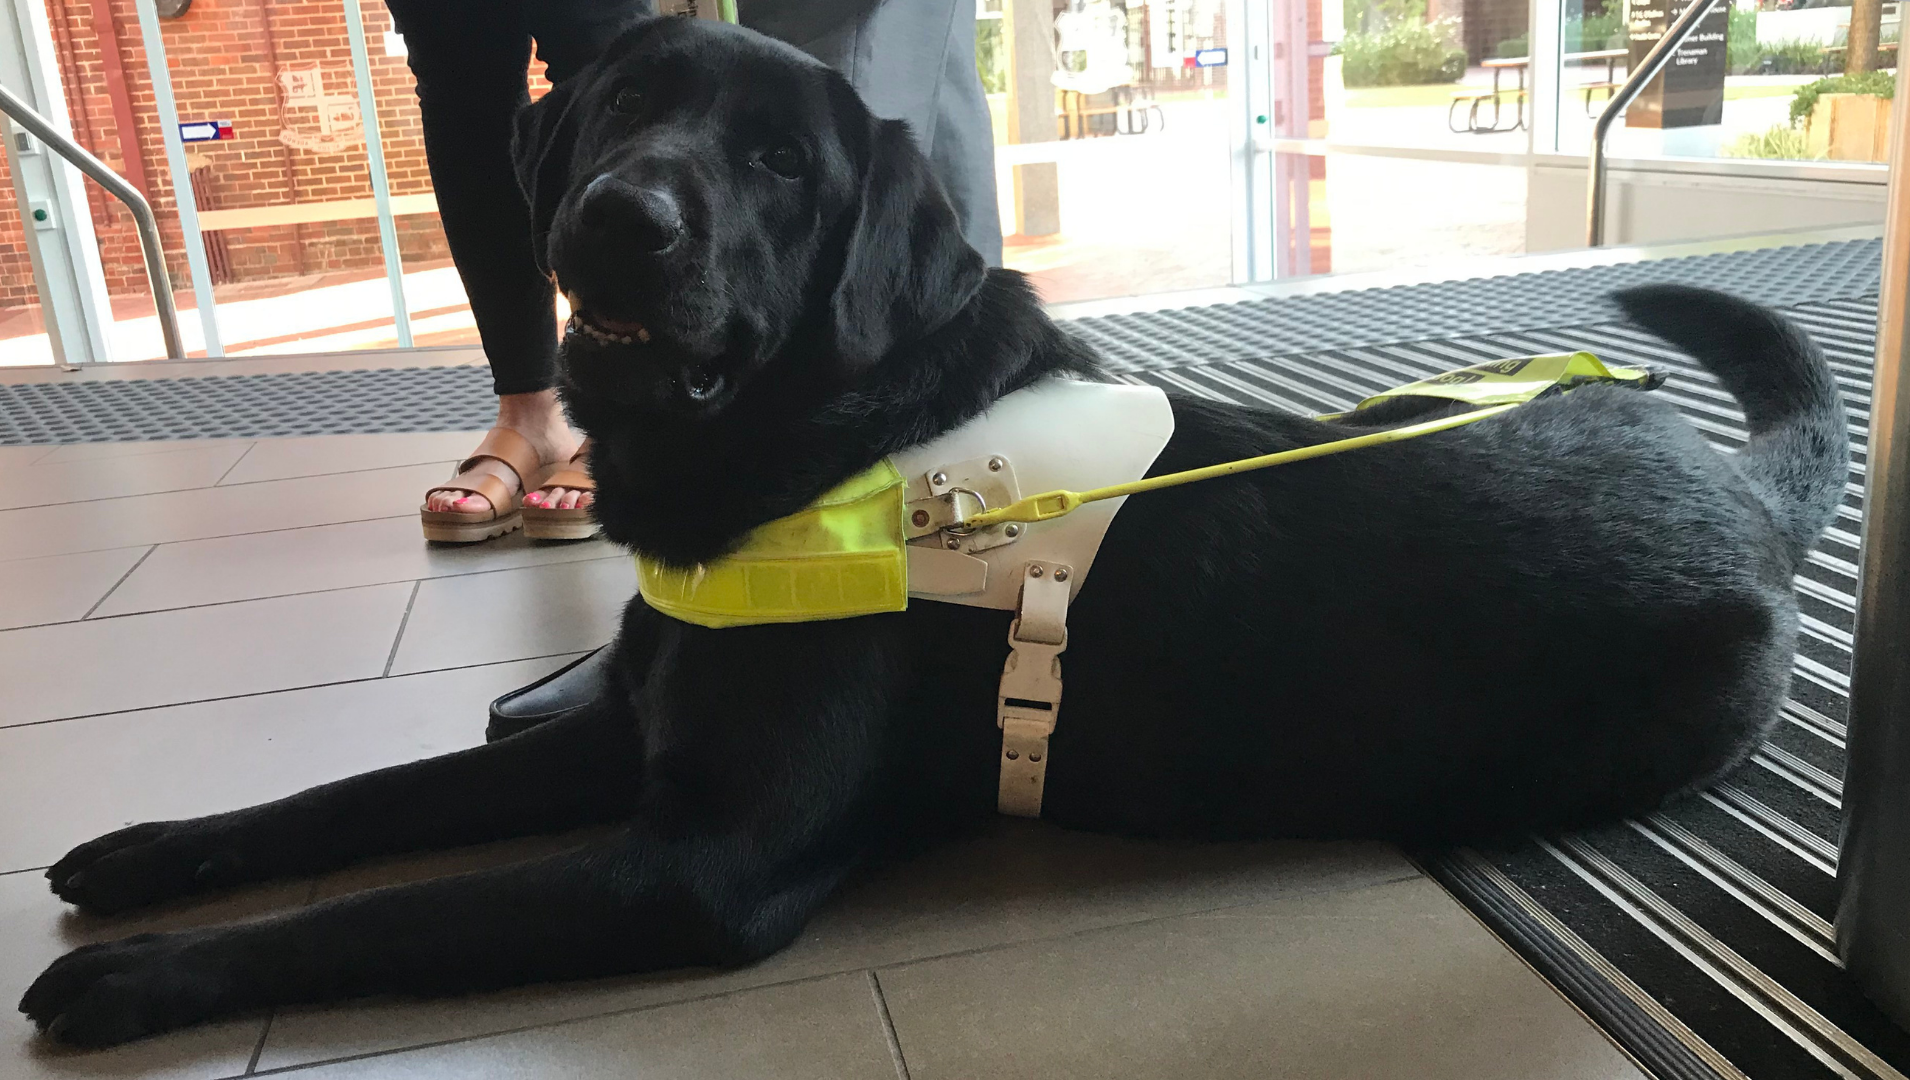 Winston the black Labrador, pictured laying down in the shade wearing his yellow harness